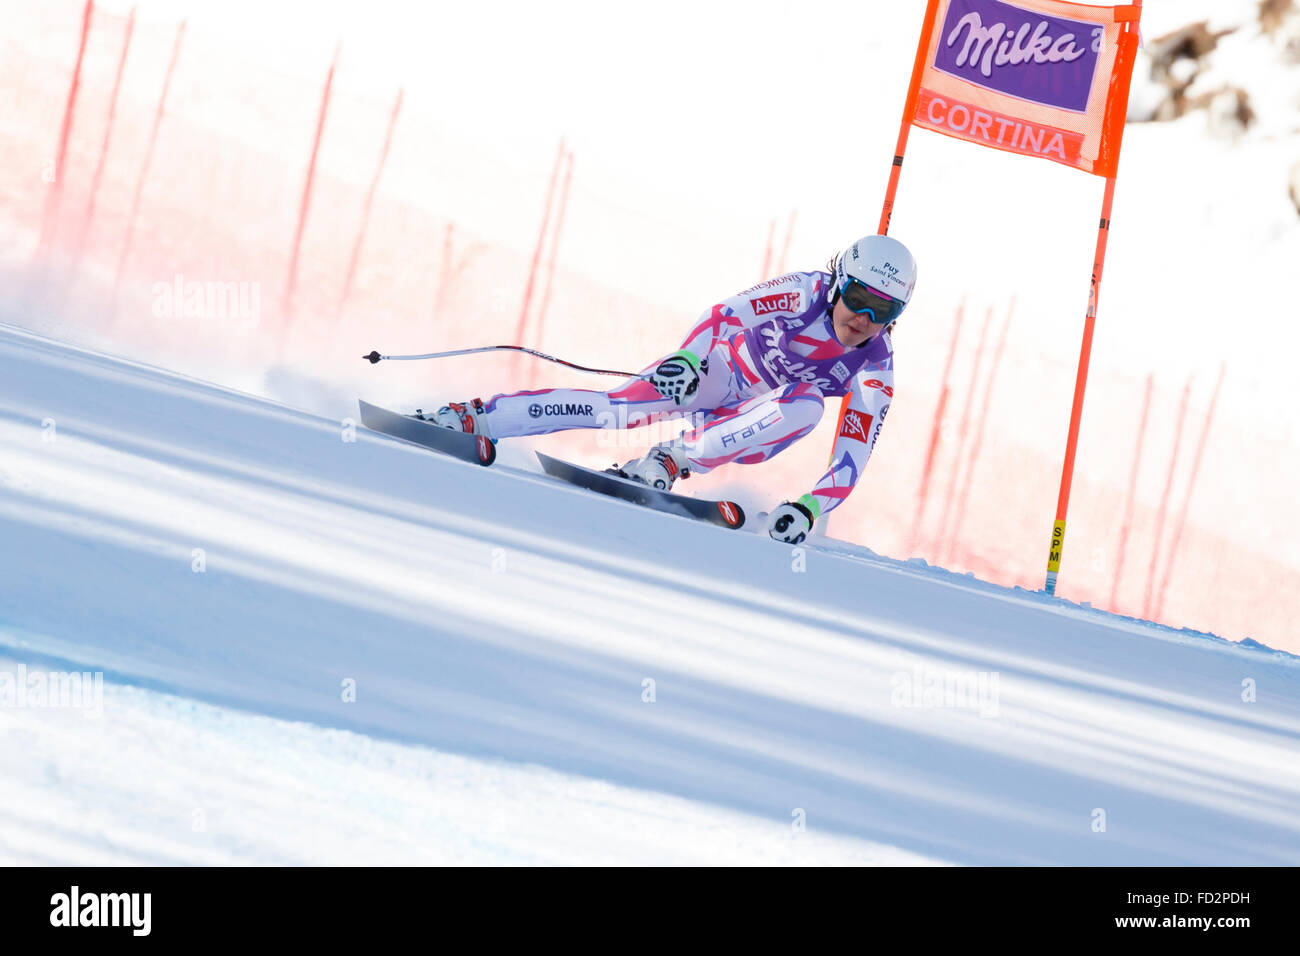 Cortina d’Ampezzo, Italy 23 January 2016. BESSY Anouk (Fra) competing in the Audi Fis Alpine Skiing World Cup Women’s downhill Stock Photo